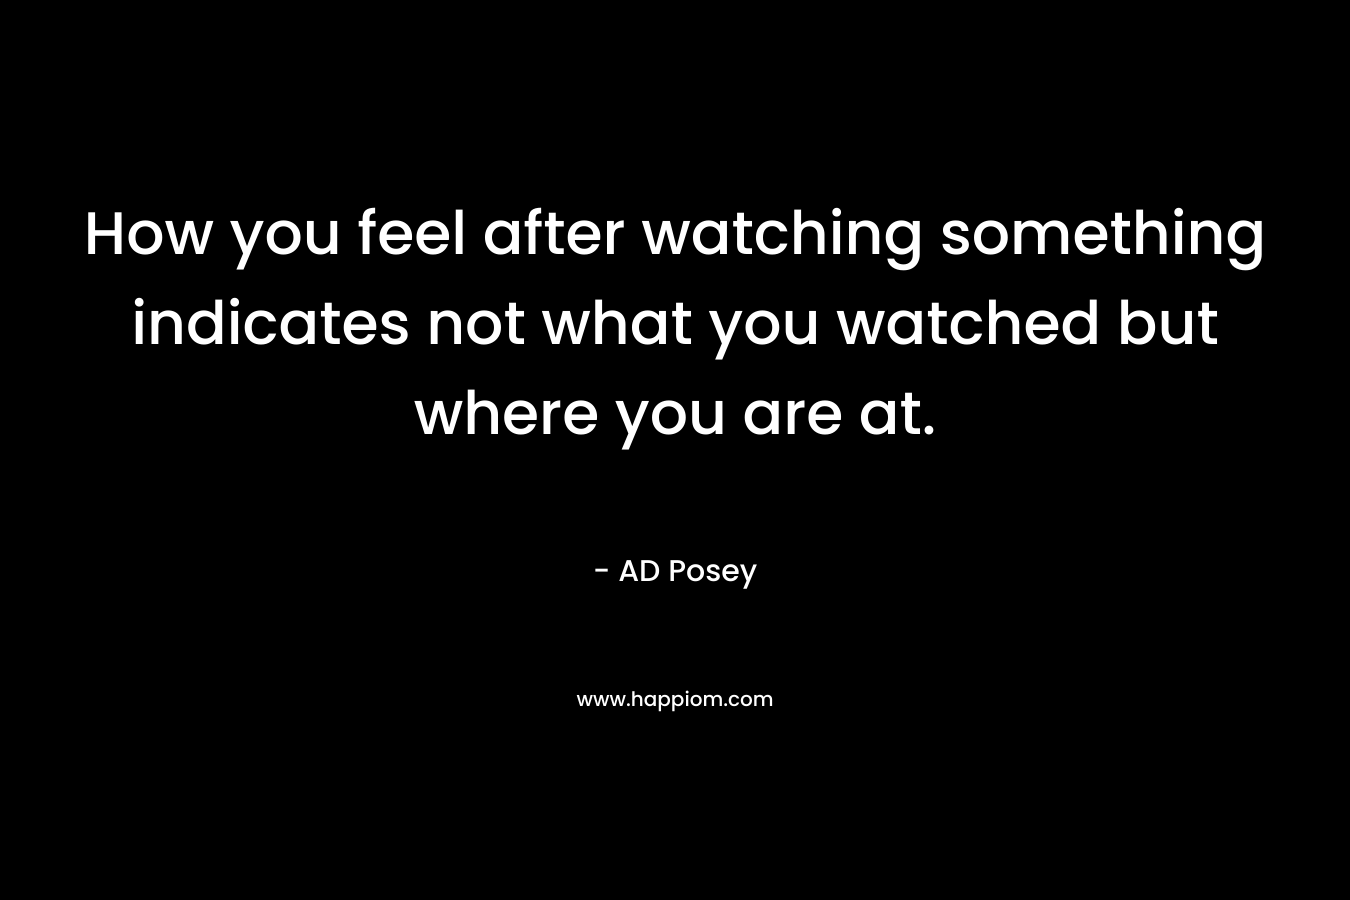 How you feel after watching something indicates not what you watched but where you are at. – AD Posey